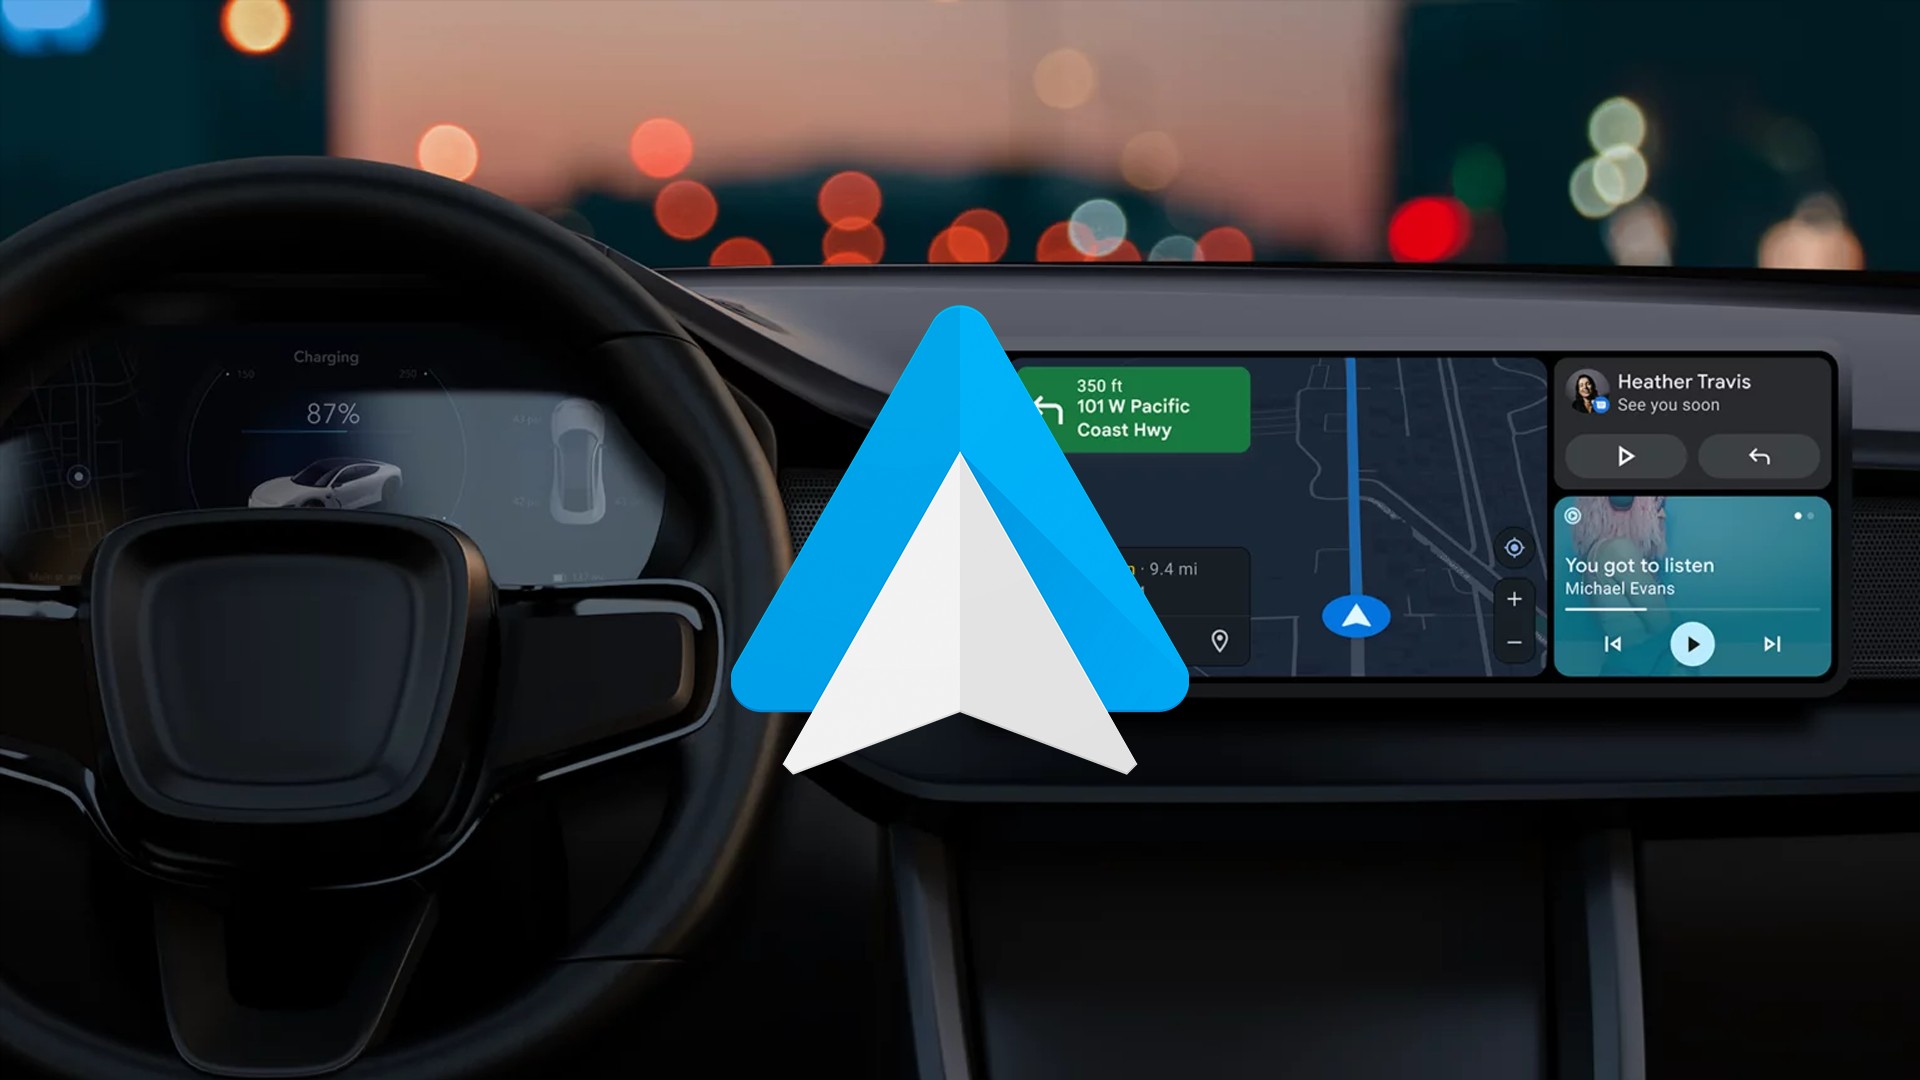 Google has released a new Android Auto update, but without major news